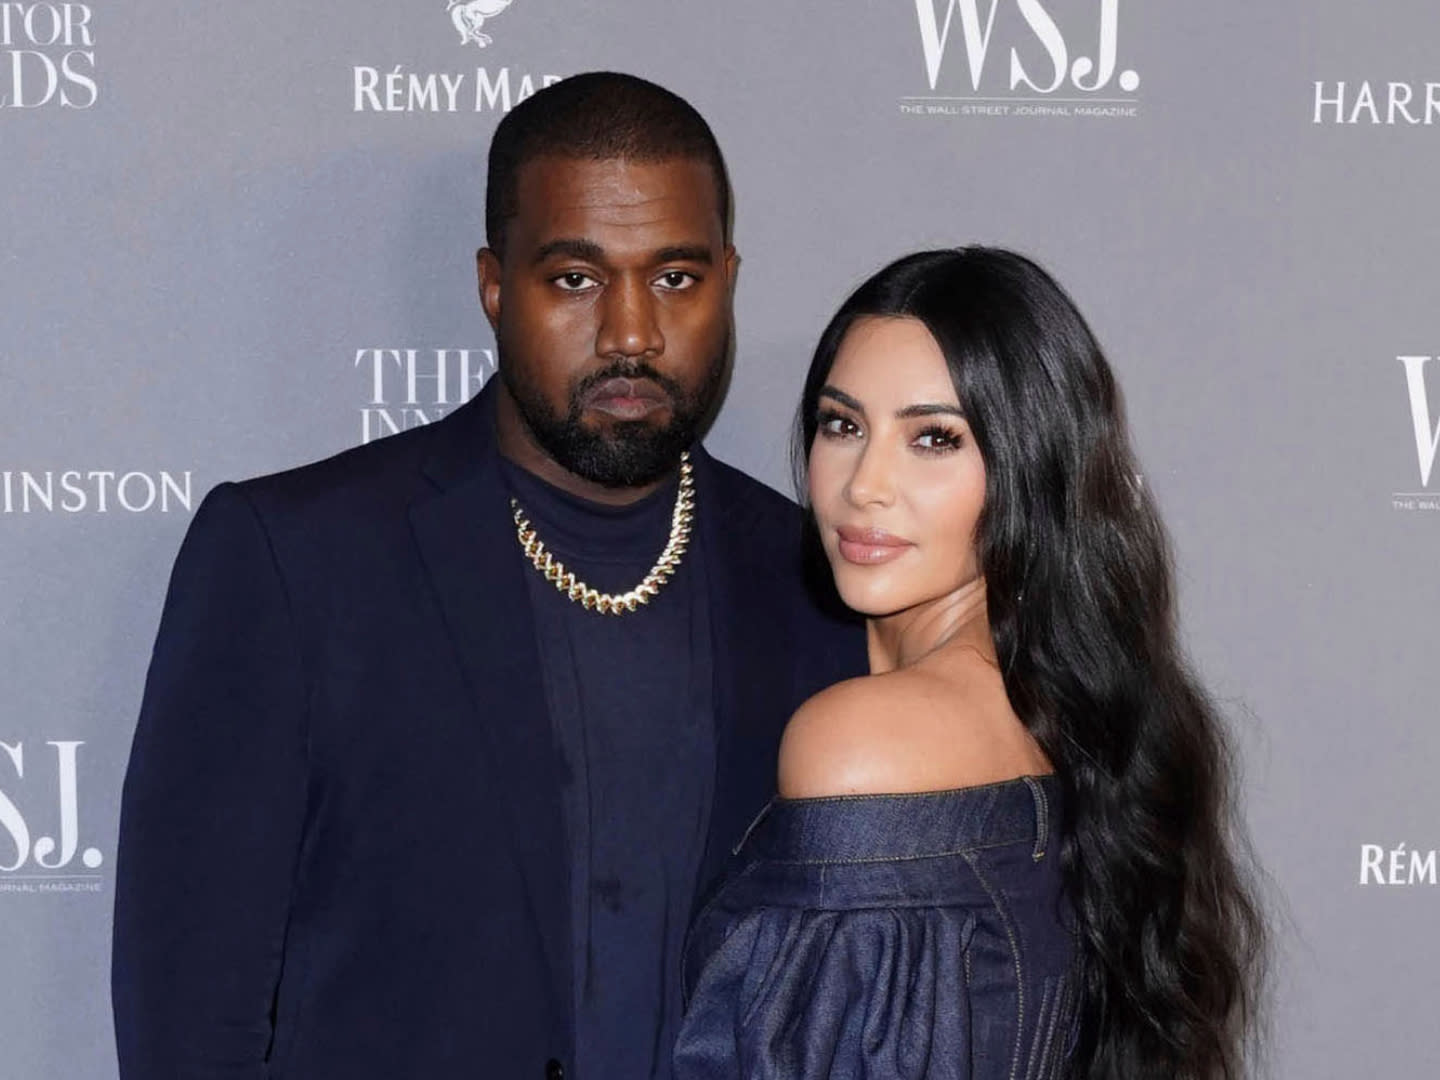 Kanye West is reportedly irritated because people think it was Kim Kardashian’s idea to divorce